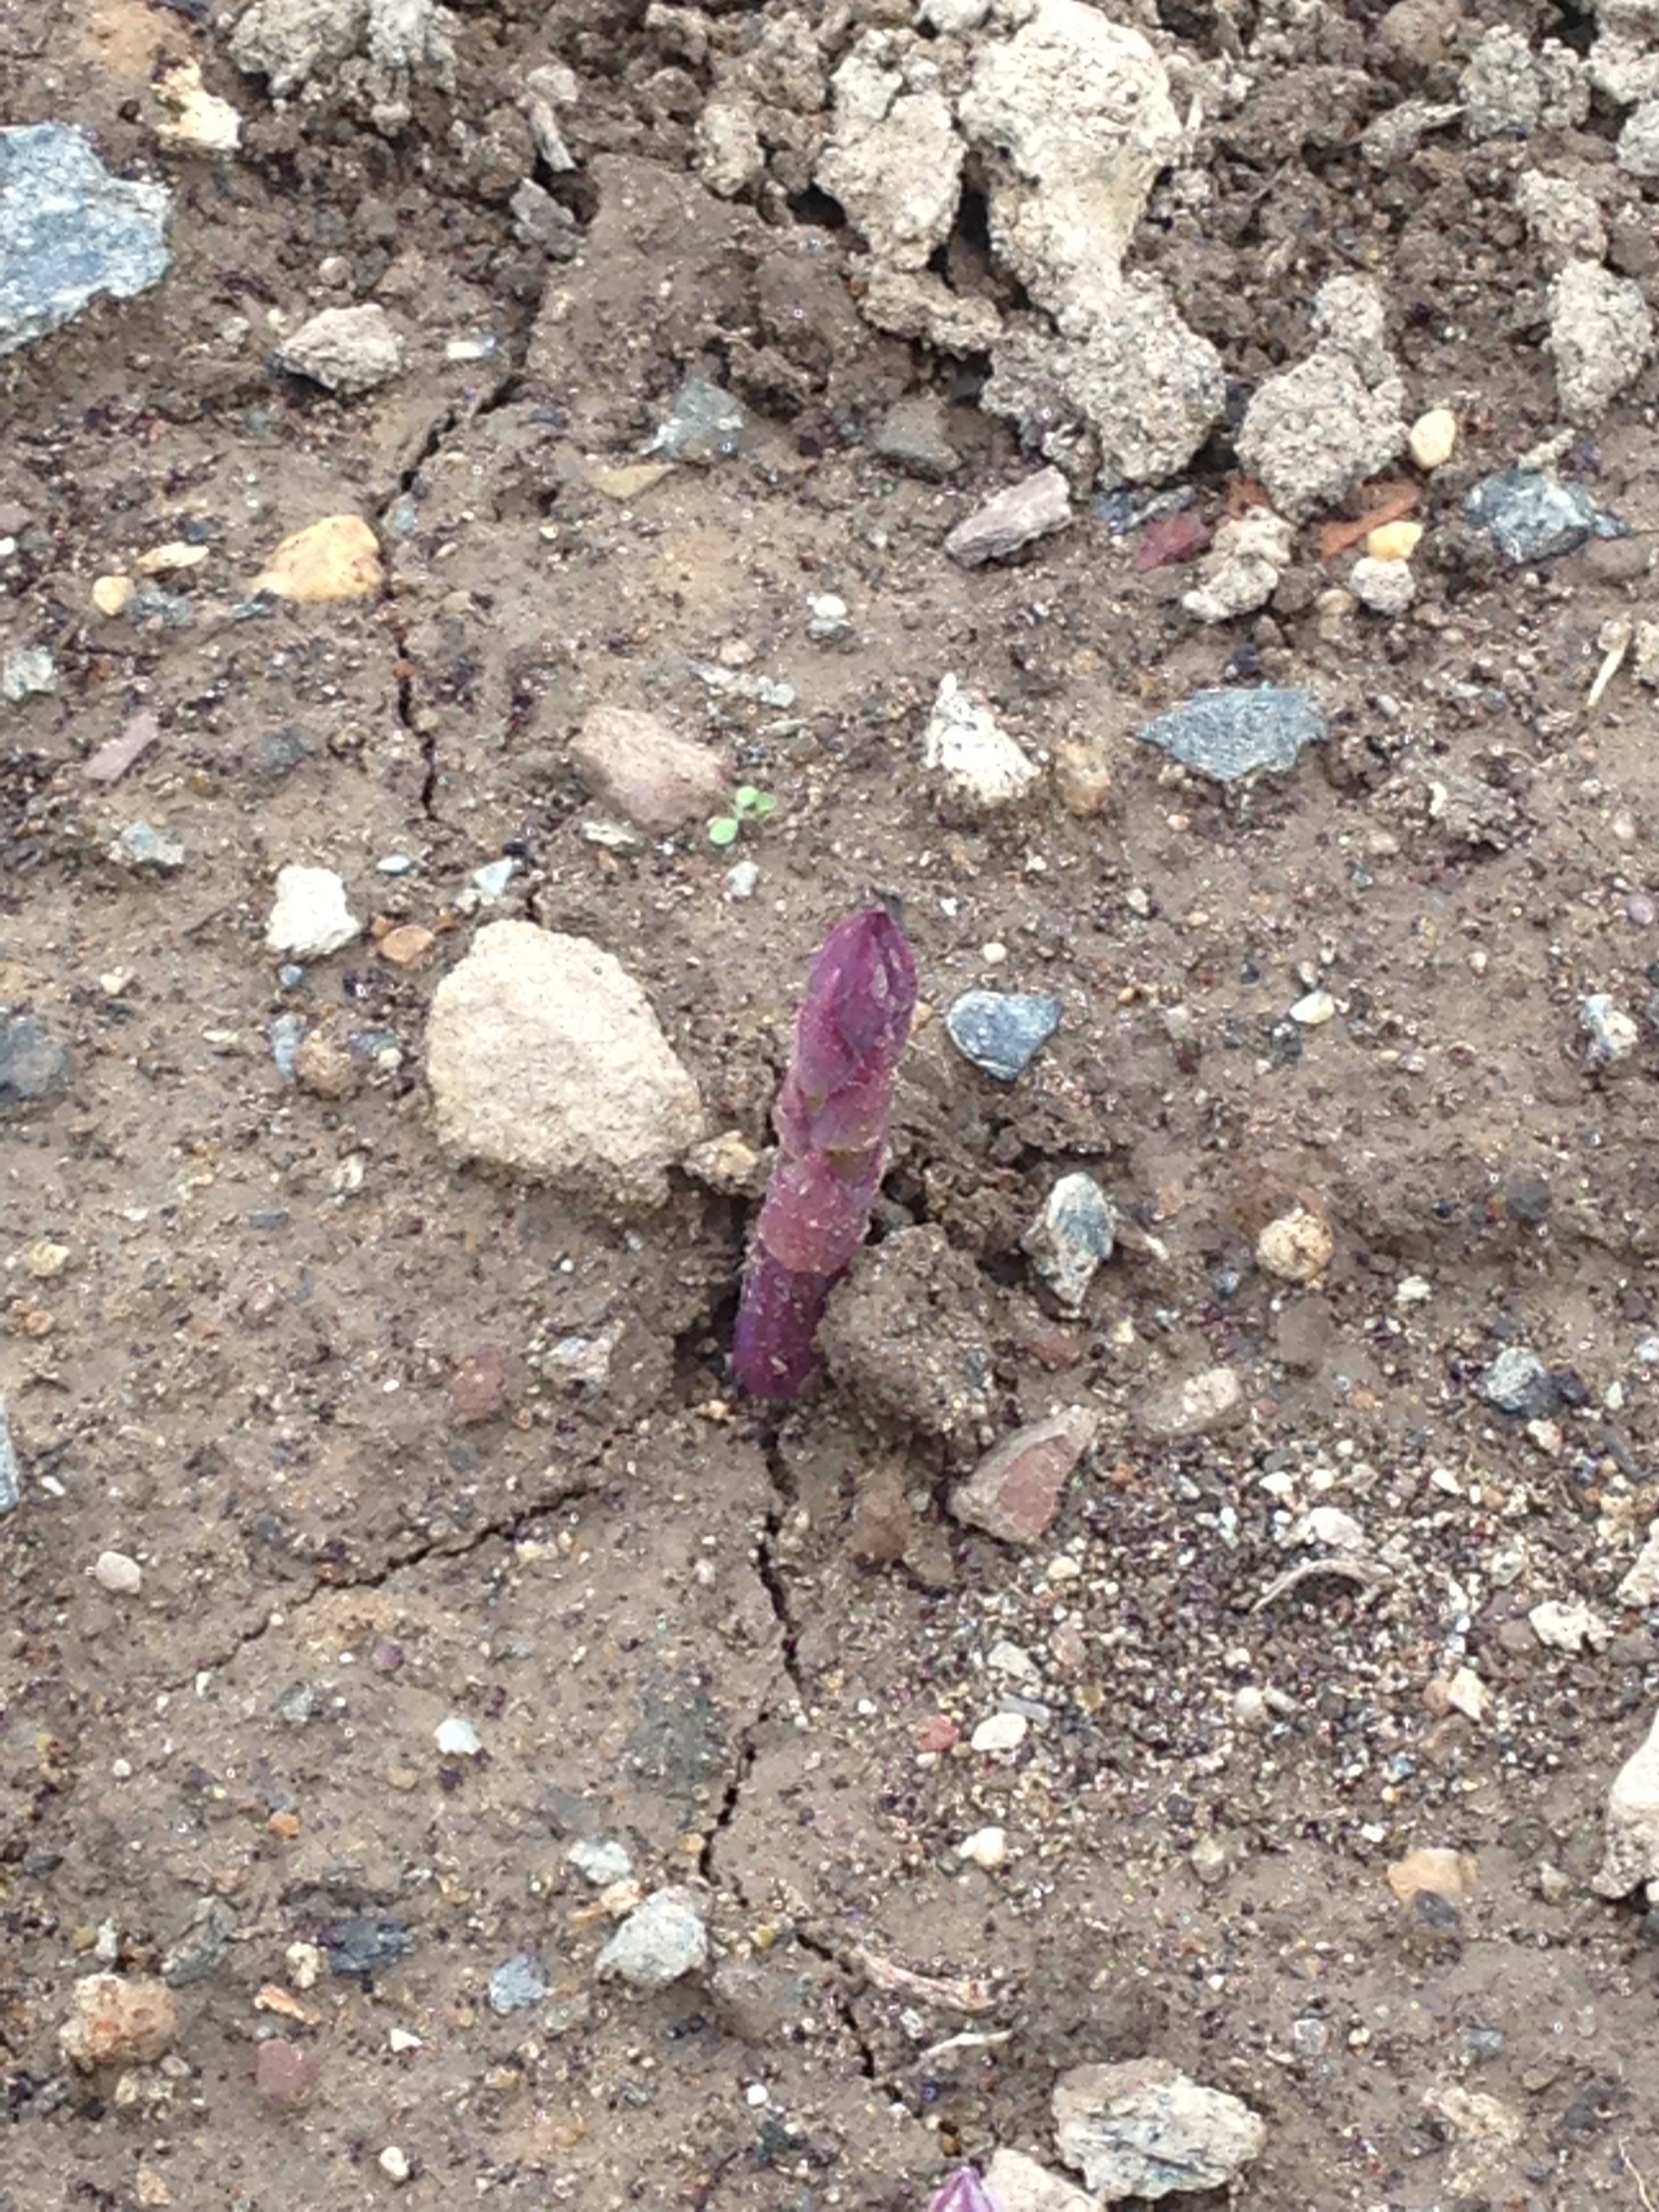 A lonely asparagus stem pushing through the soil.